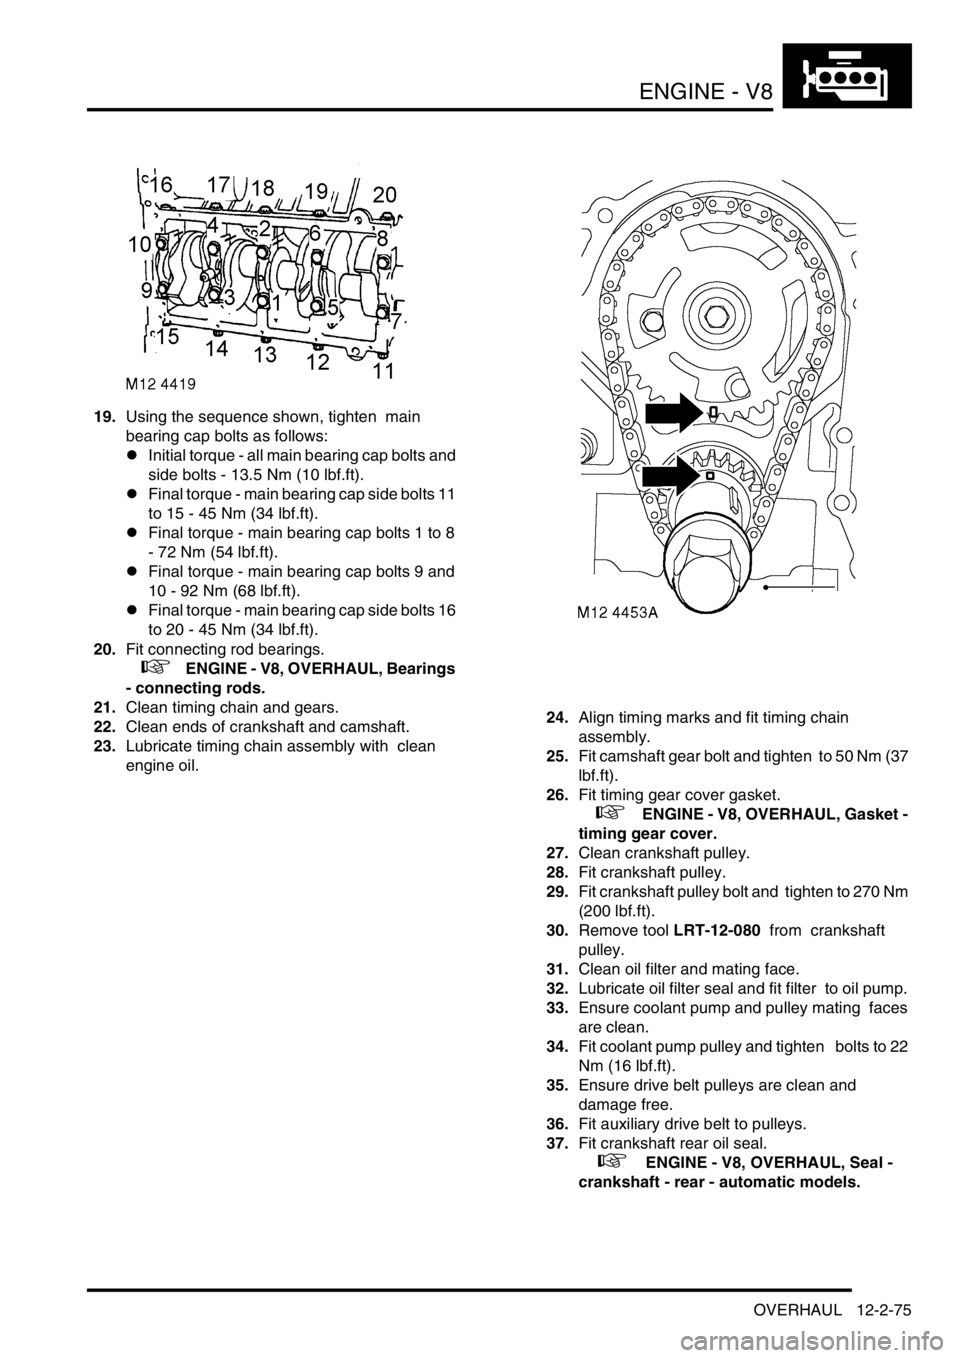 LAND ROVER DISCOVERY 2002  Workshop Manual ENGINE - V8
OVERHAUL 12-2-75
19.Using the sequence shown, tighten  main 
bearing cap bolts as follows: 
lInitial torque - all main bearing cap bolts and 
side bolts - 13.5 Nm (10 lbf.ft).
lFinal torqu